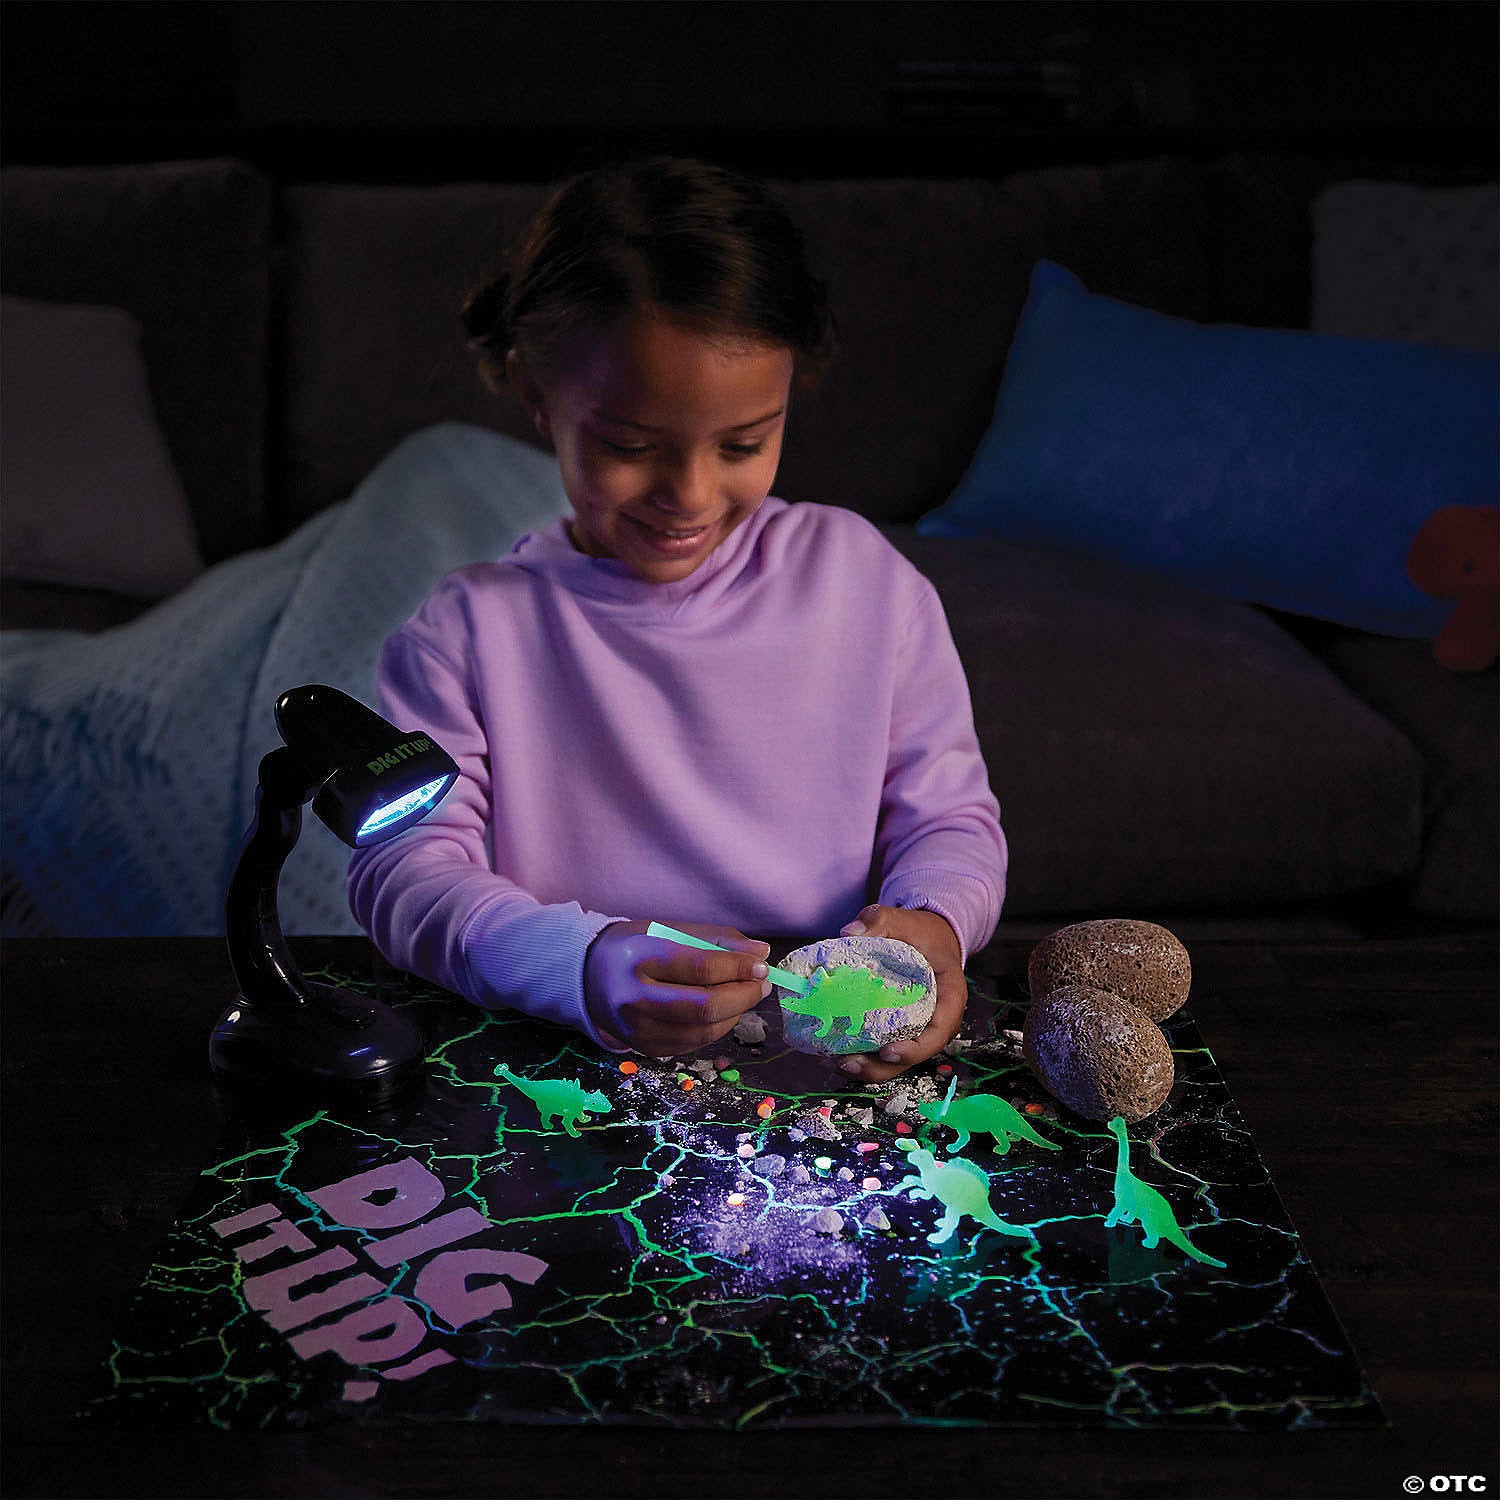 Dig It Up! Glow-In-The-Dark Dinosaur Eggs by Mindware